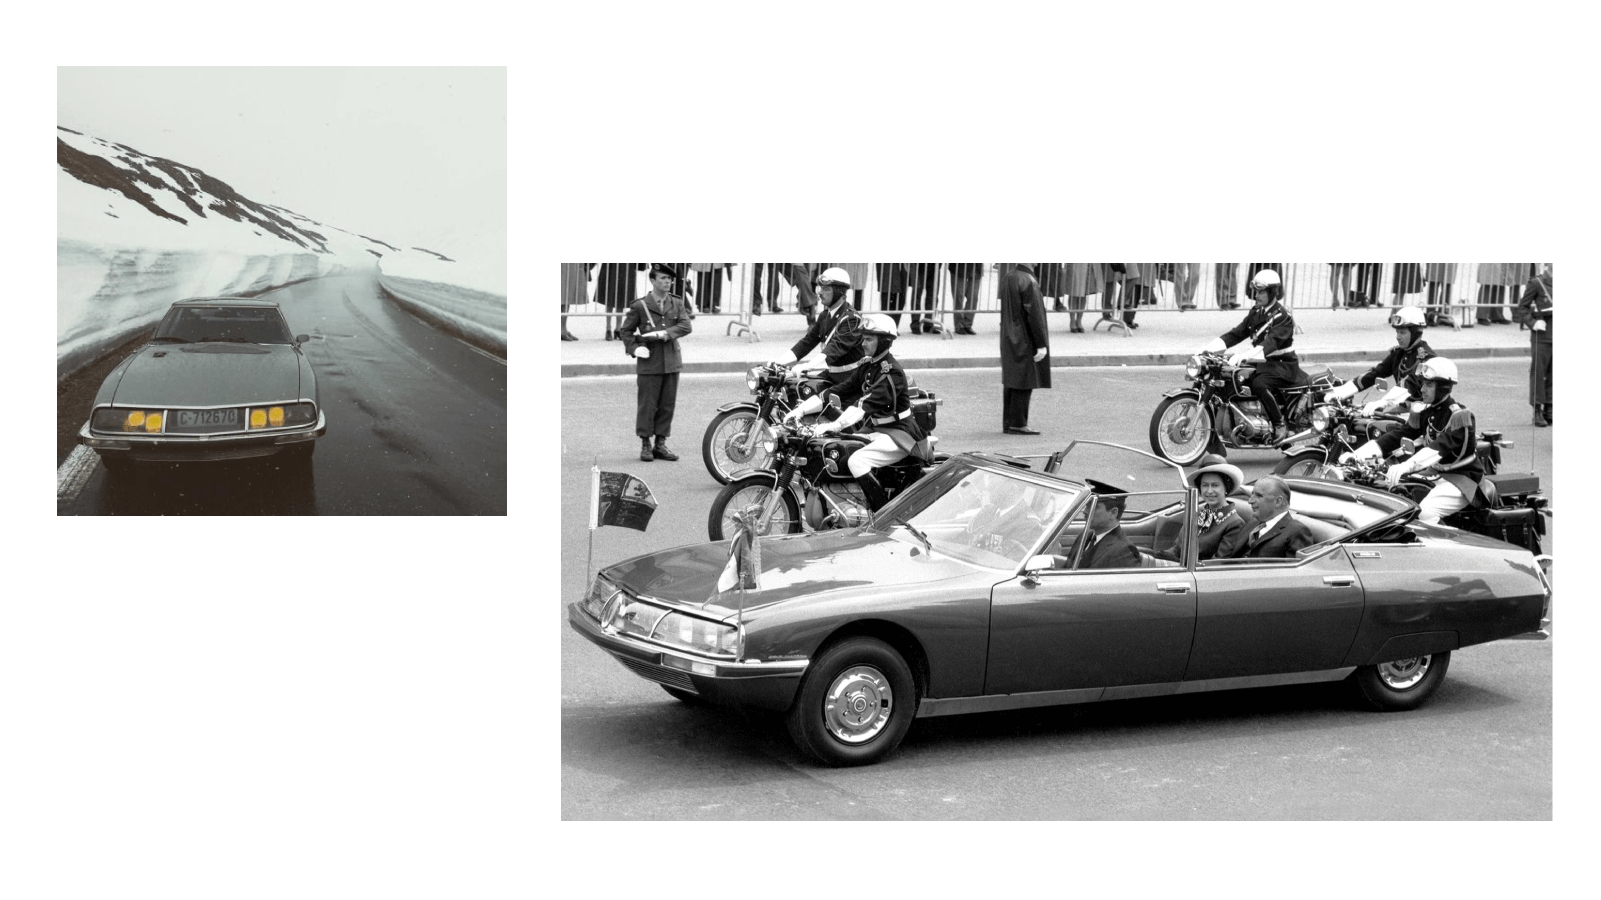 Citroen SM photo collage of SM in the Alps and 4-door SM Cabriolet with the french president Georges Pompidou